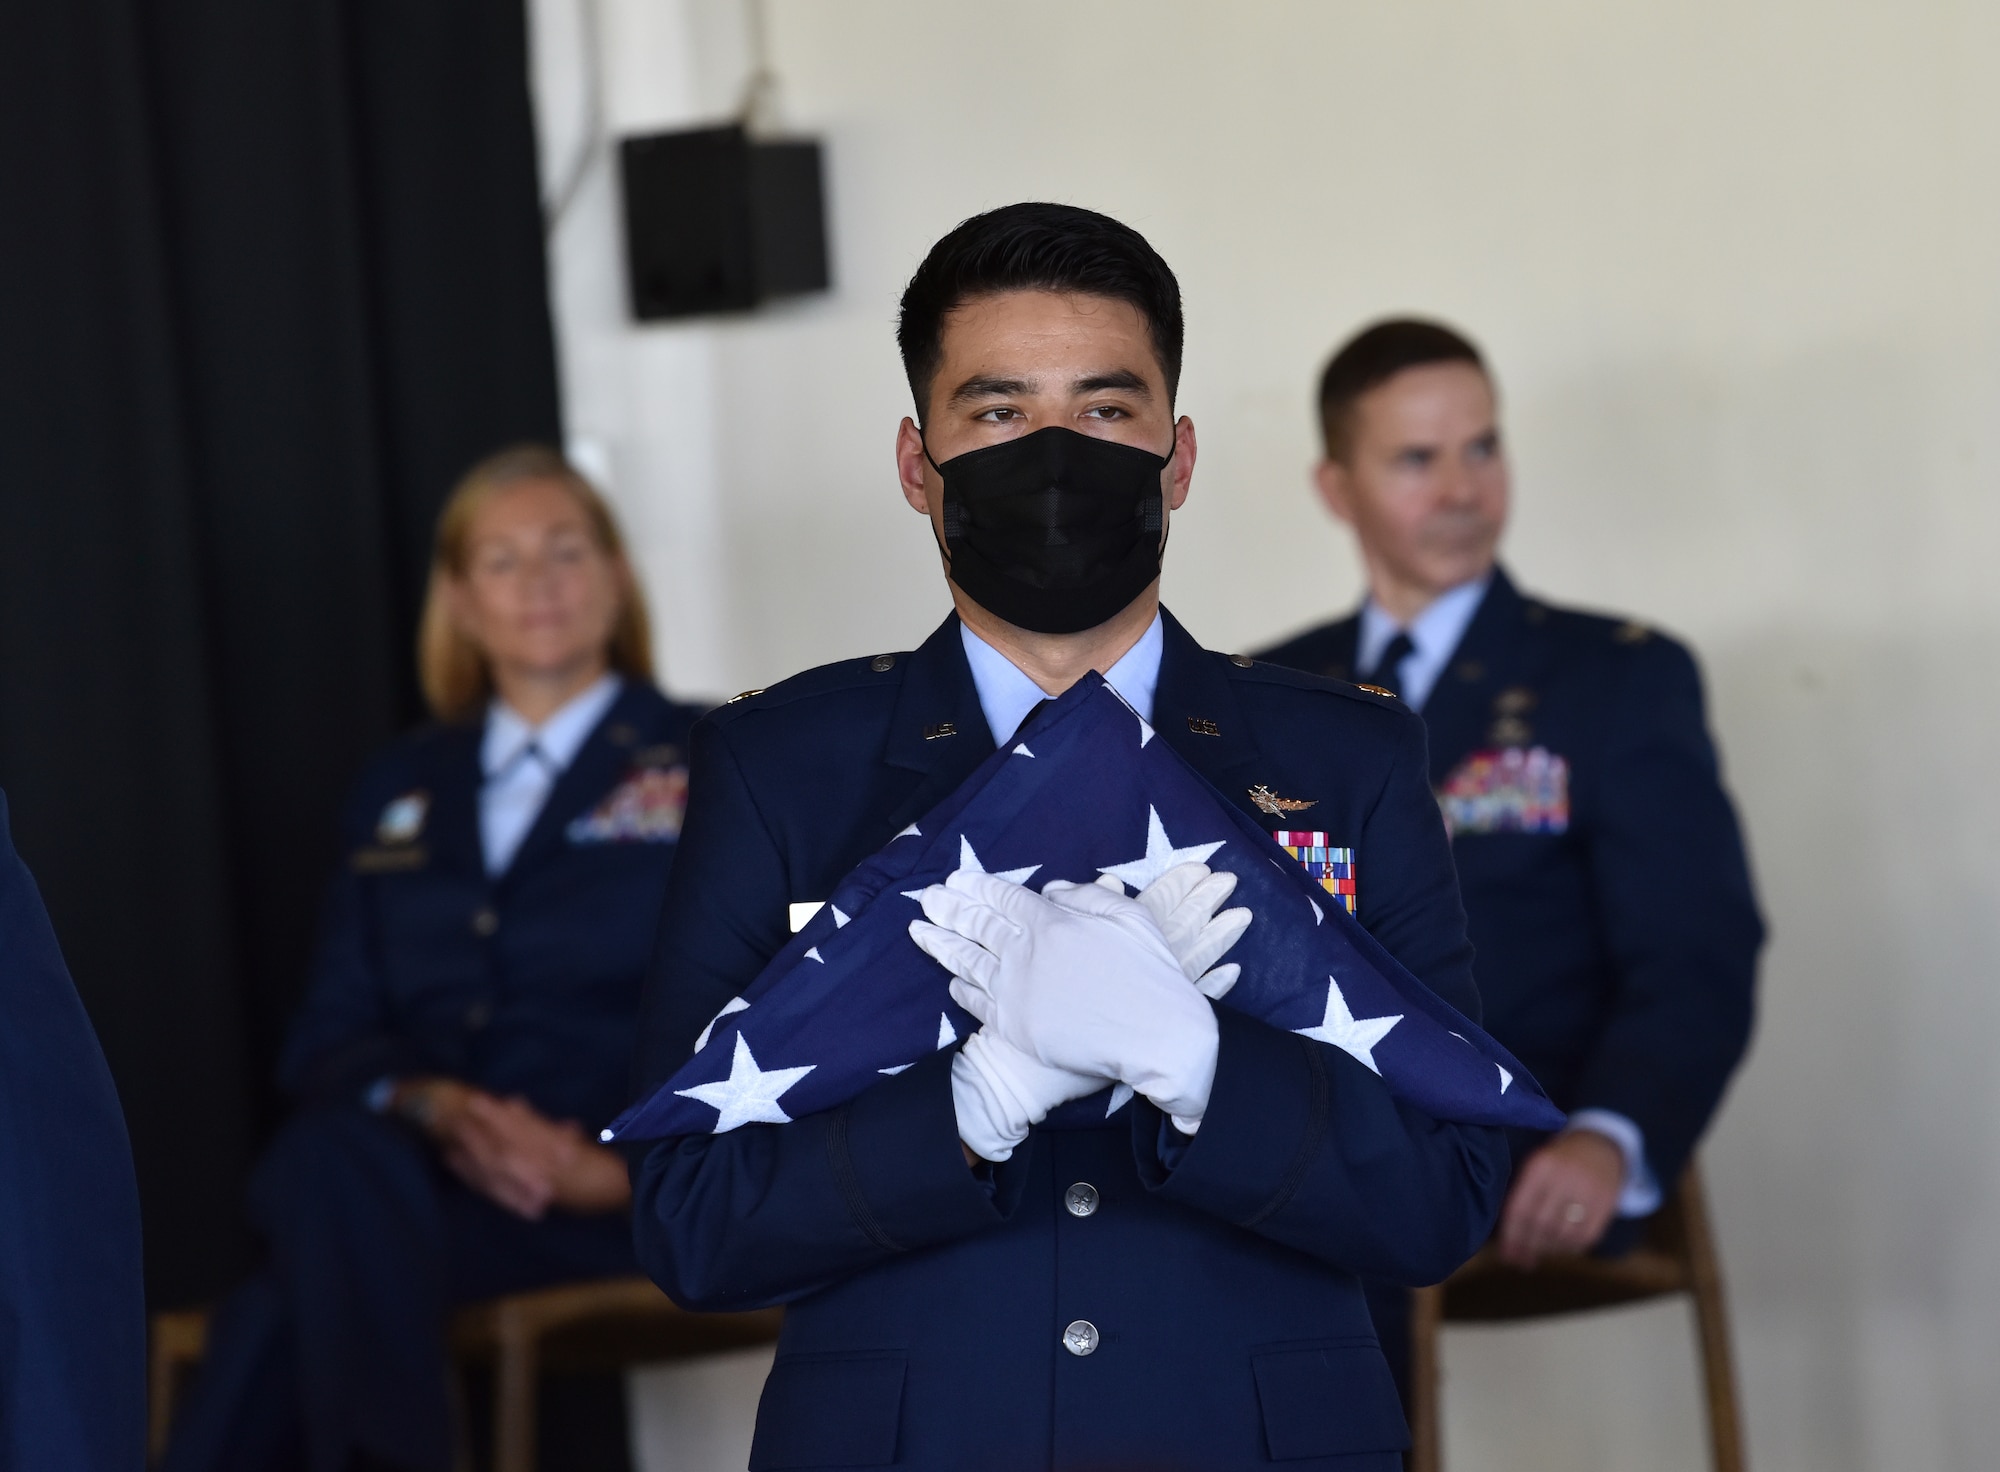 U.S. Air Force Maj. Vincent Taylor, 56th Air Communications Squadron director of Operations, holds a folded U.S. flag as part of a presentation during his father’s, Col. Ralph “Eddie” Taylor, Pacific Air Forces director of Manpower, Personnel and Services, retirement ceremony at Joint Base Pearl Harbor-Hickam, Hawaii on July 15, 2022. Vincent and his father have shared two assignments together throughout their careers. (U.S. Air Force photo by Master Sgt. Joshua Williams)